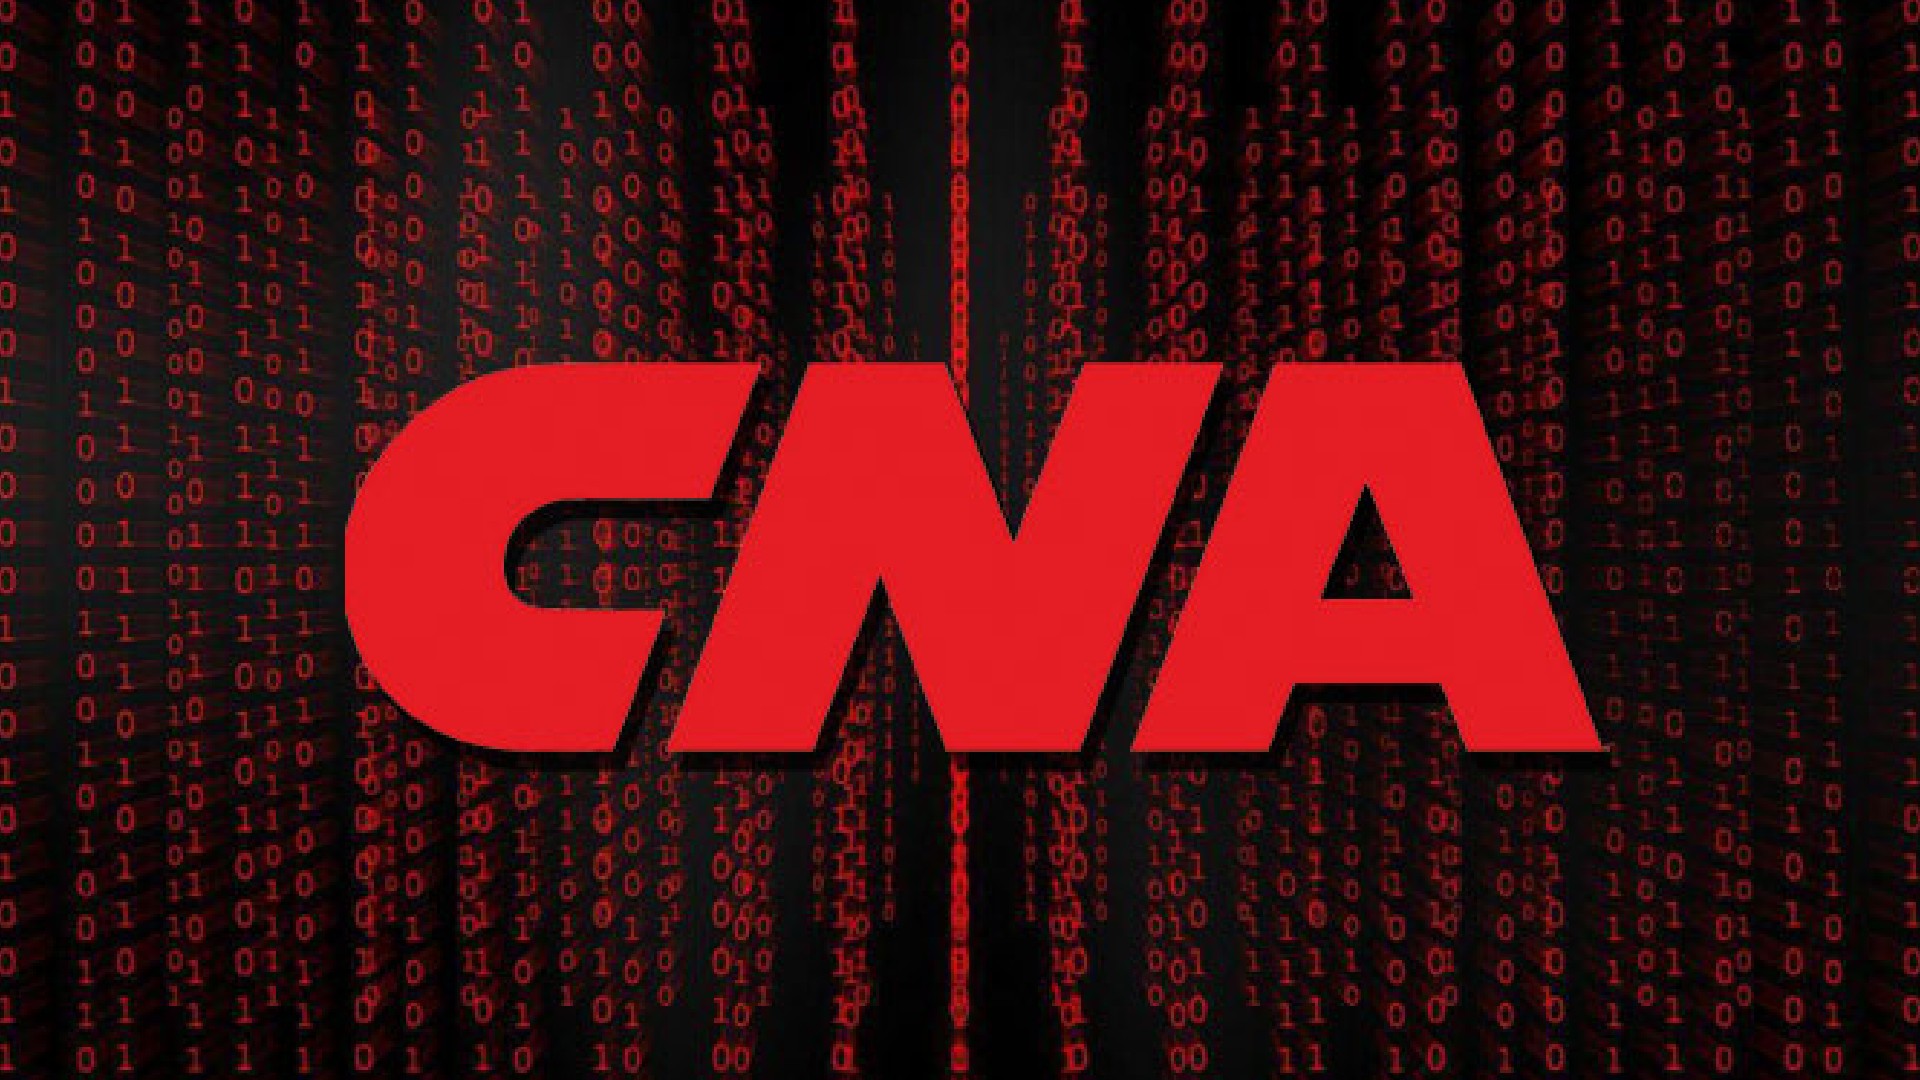 Insurance Firm CNA Financial Reportedly Paid Hackers $40 Million in Ransom